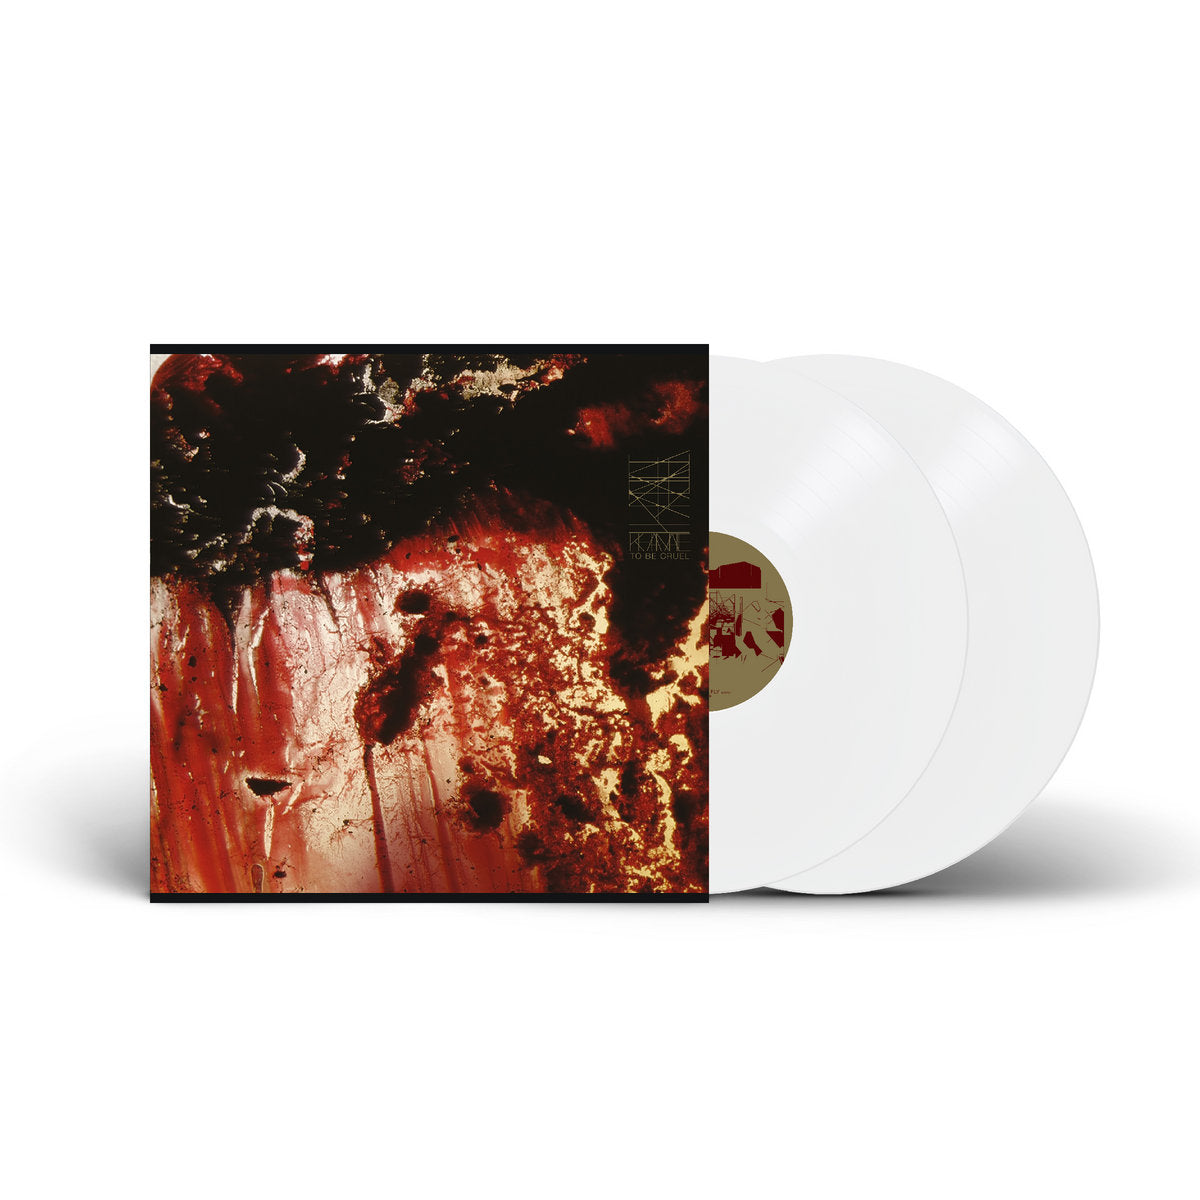 Khanate - To Be Cruel (Limited Edition on Double White Vinyl)